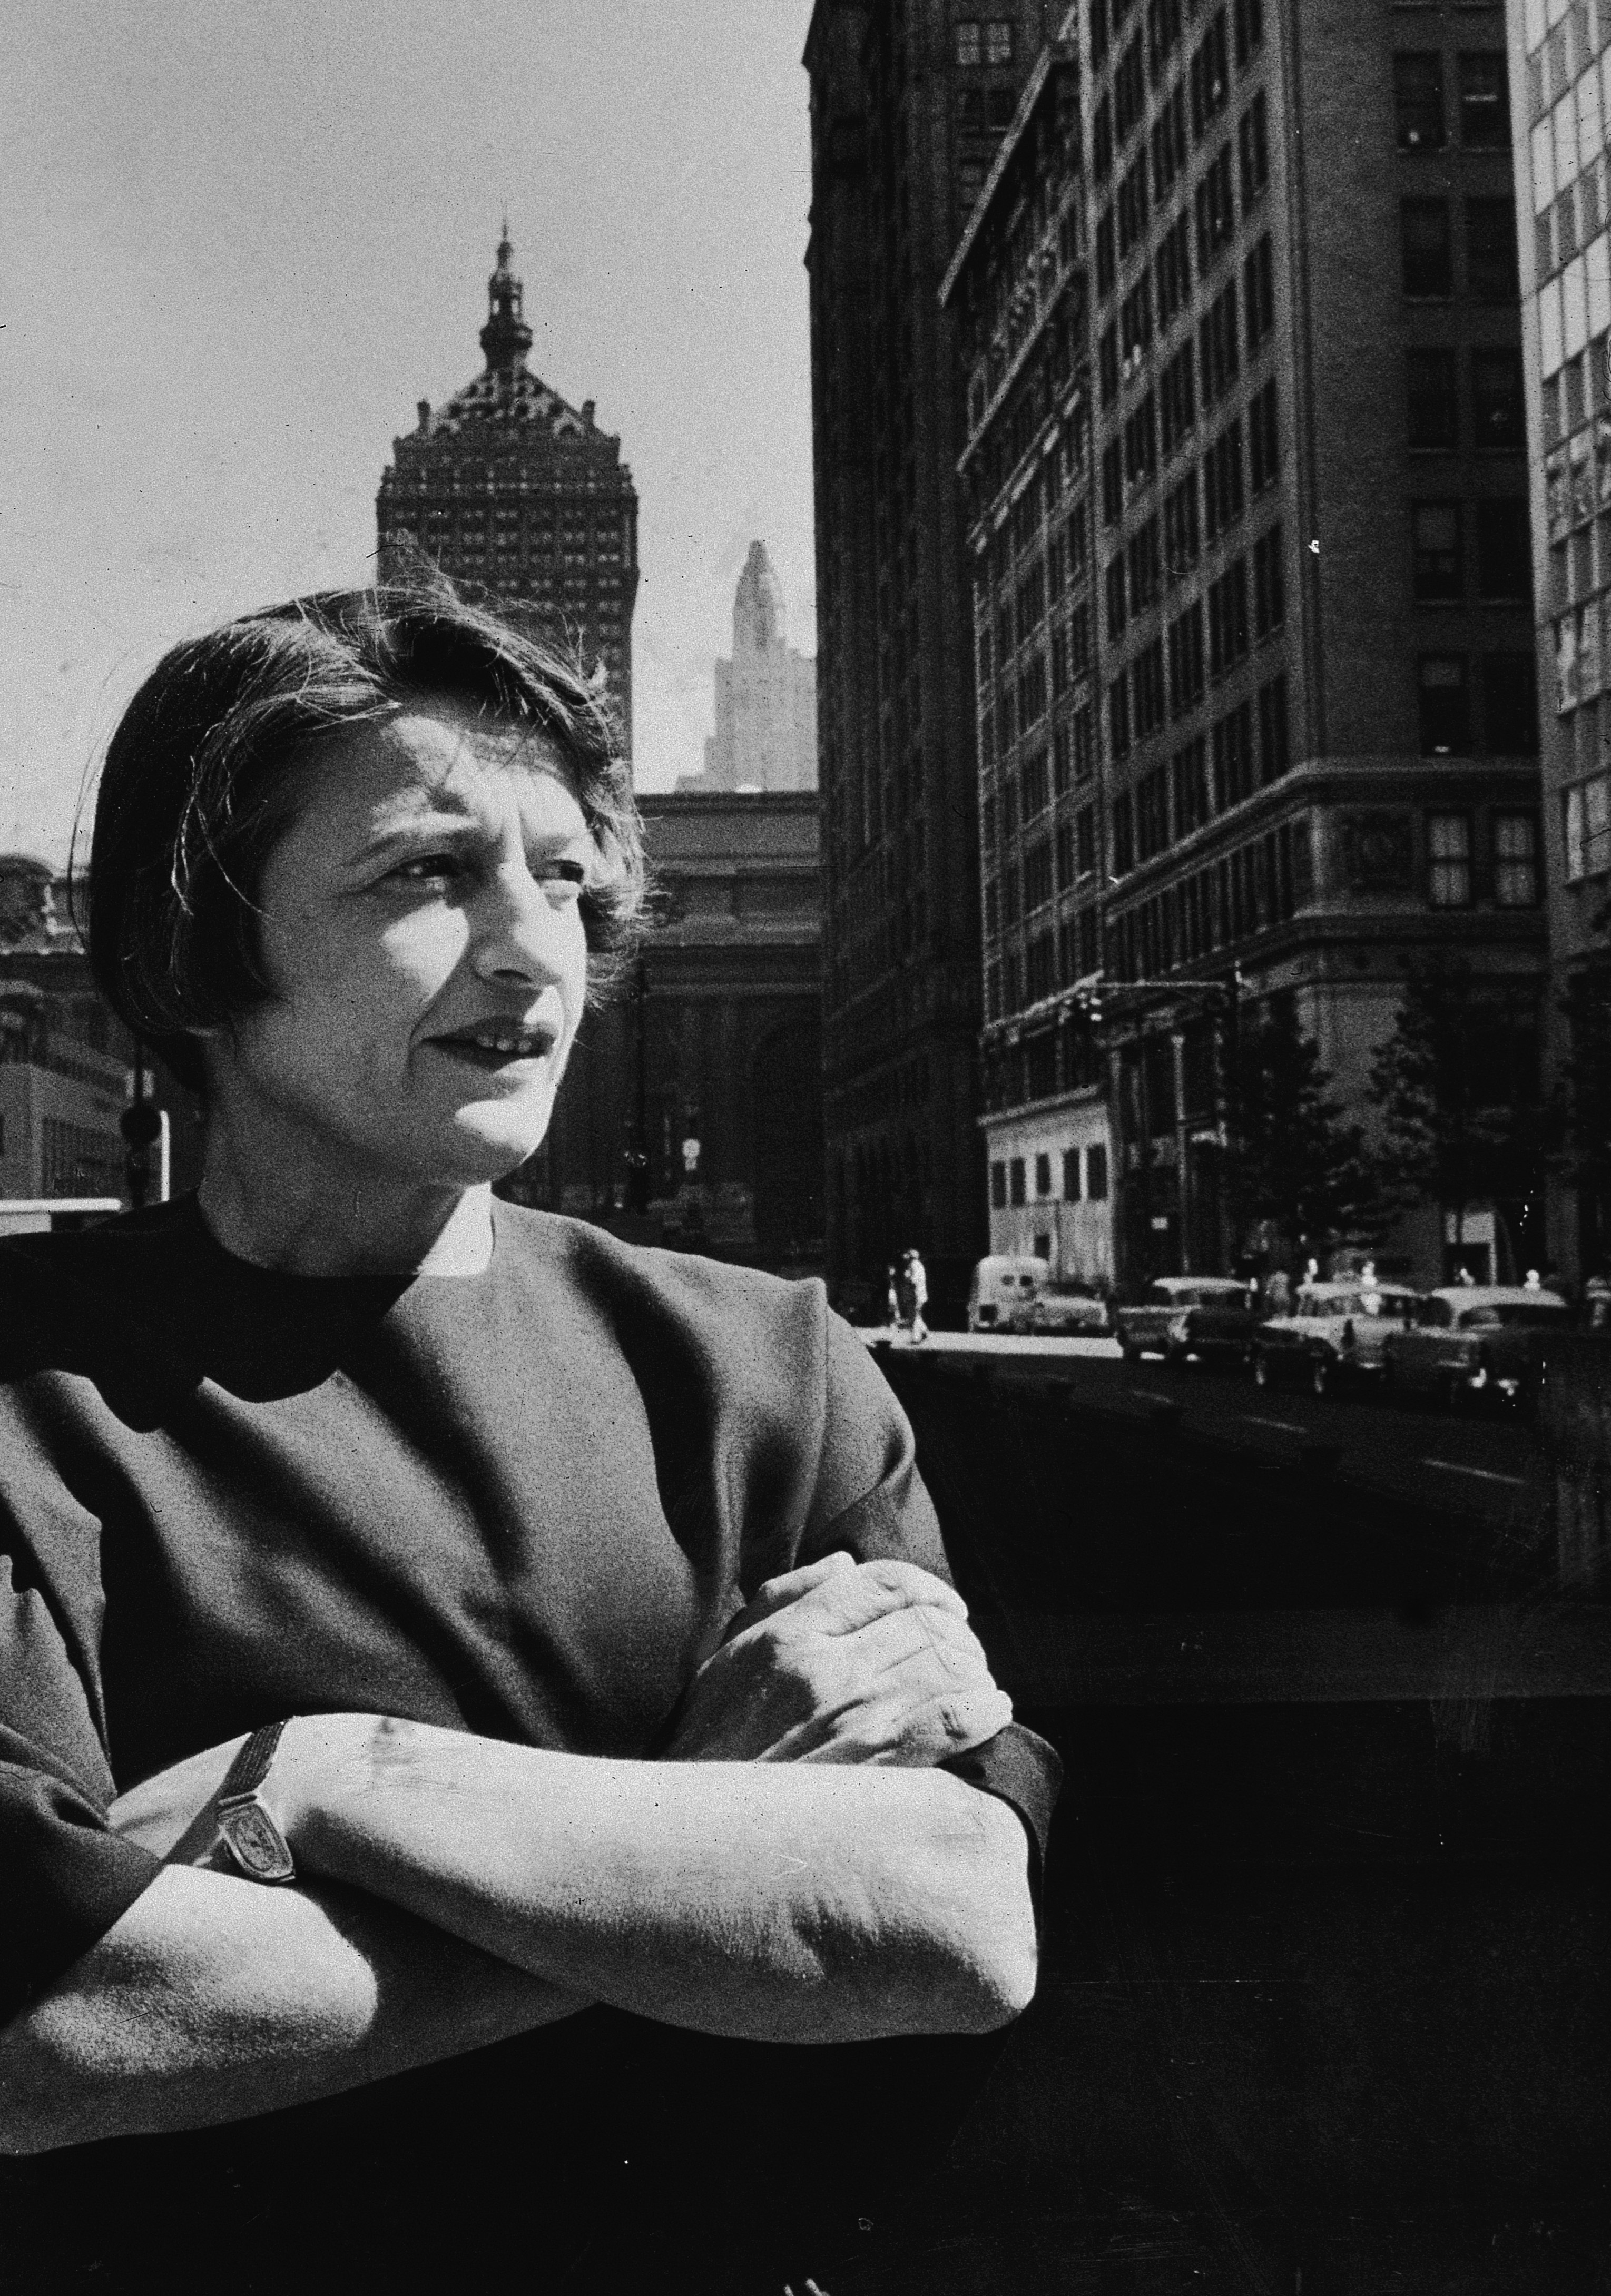 Russian-born author and philosopher Ayn Rand (1905 - 1982) stands with her arms folded on a street in New York City in 1957.